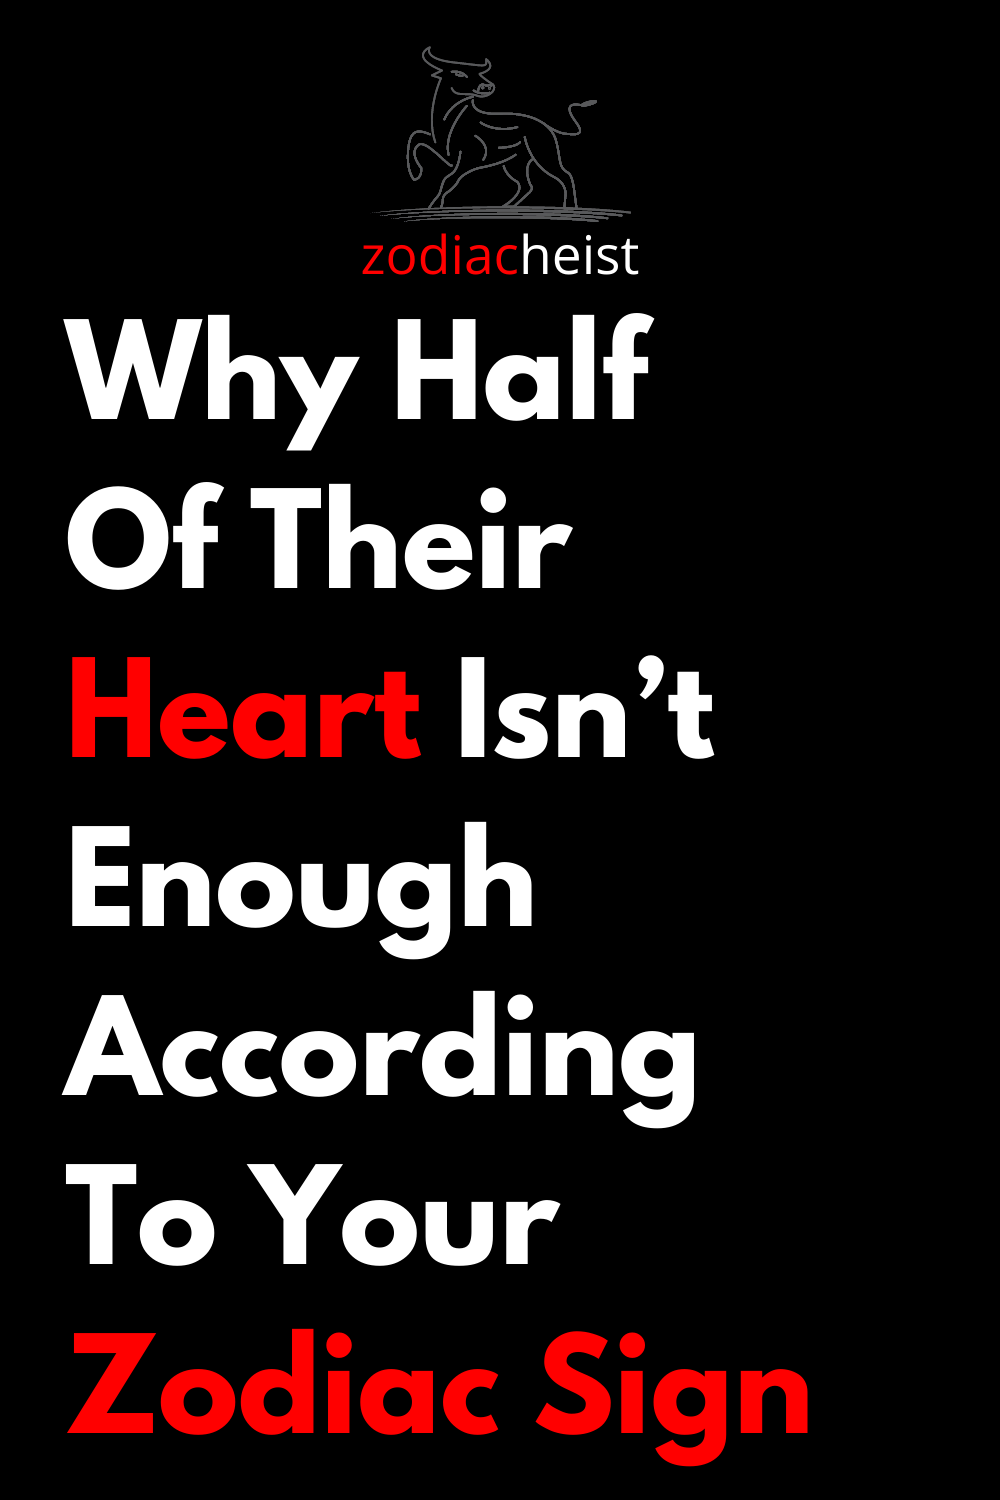 Why Half Of Their Heart Isn’t Enough According To Your Zodiac Sign